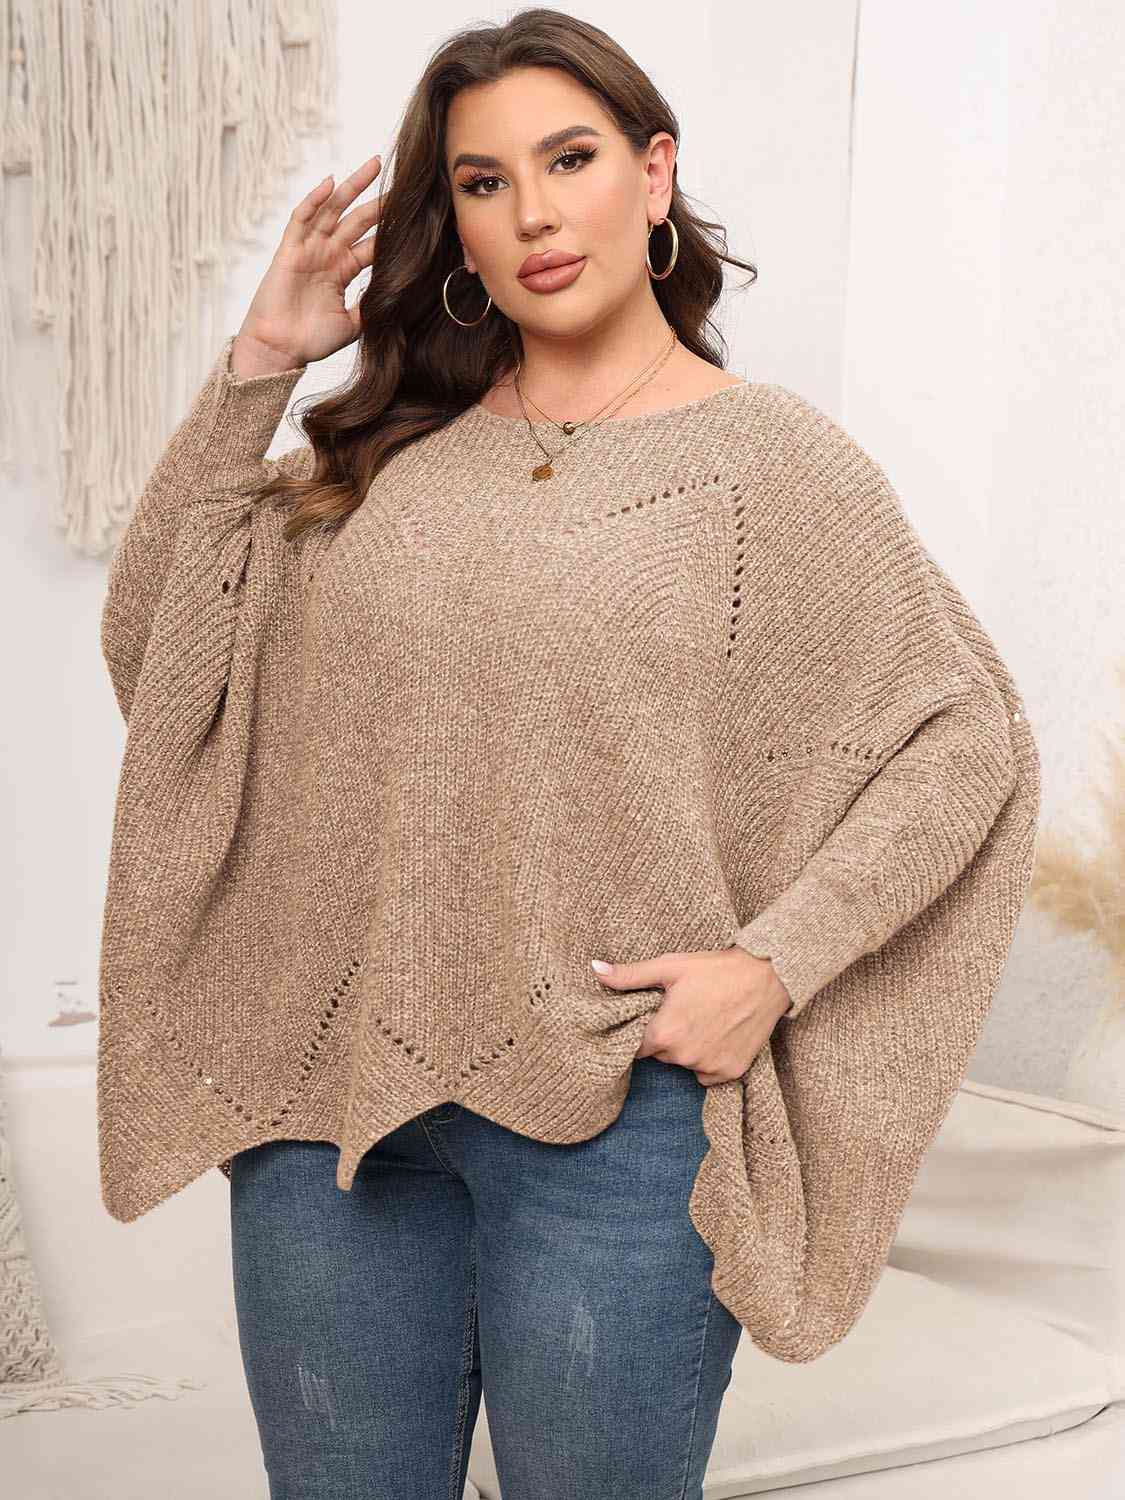 Plus Size Round Neck Batwing Sleeve Sweater BLUE ZONE PLANET